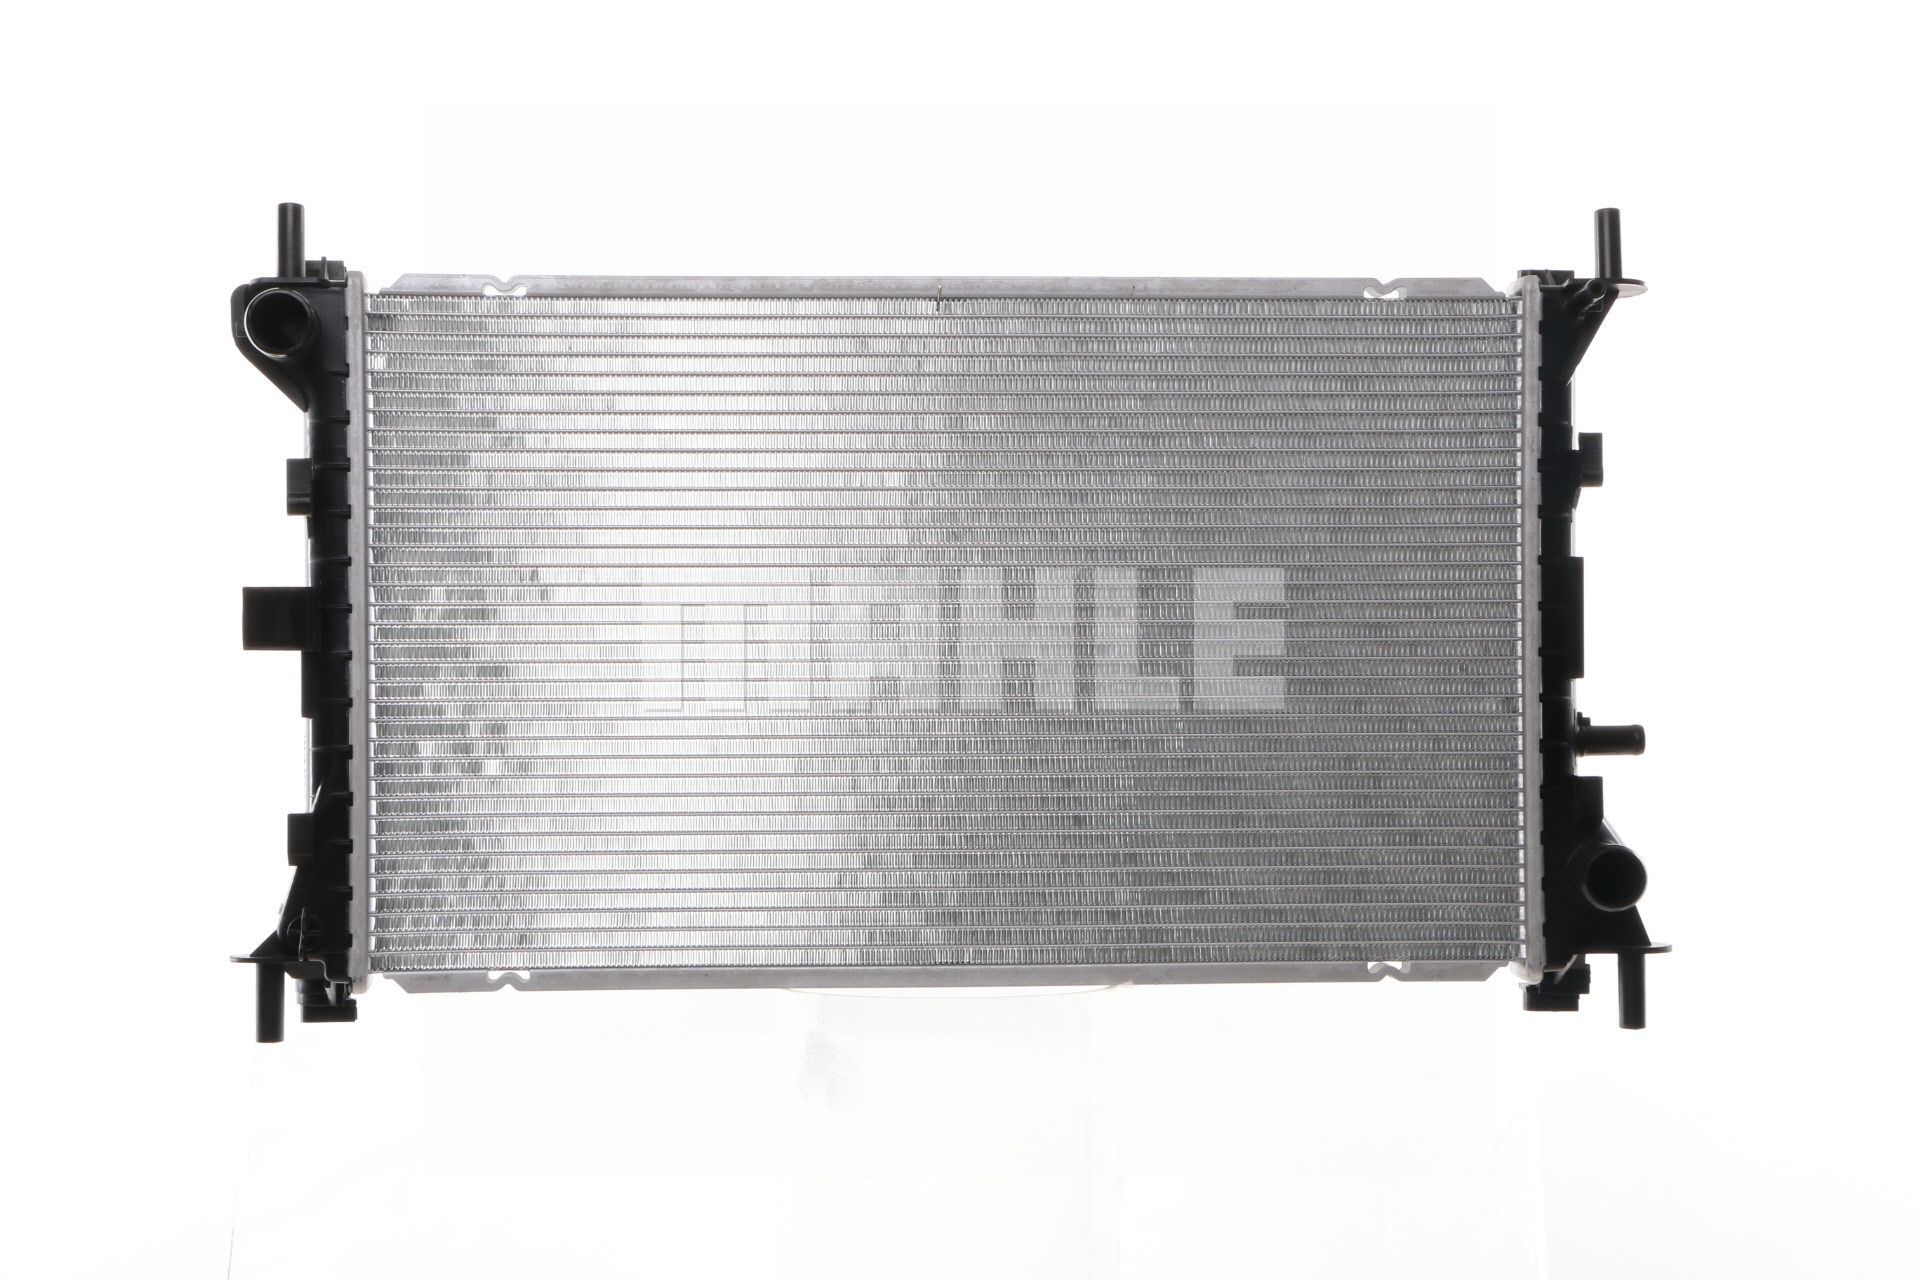 CR 627 000S MAHLE ORIGINAL Radiators FORD for vehicles with air conditioning, 603 x 358 x 23 mm, Manual Transmission, Brazed cooling fins